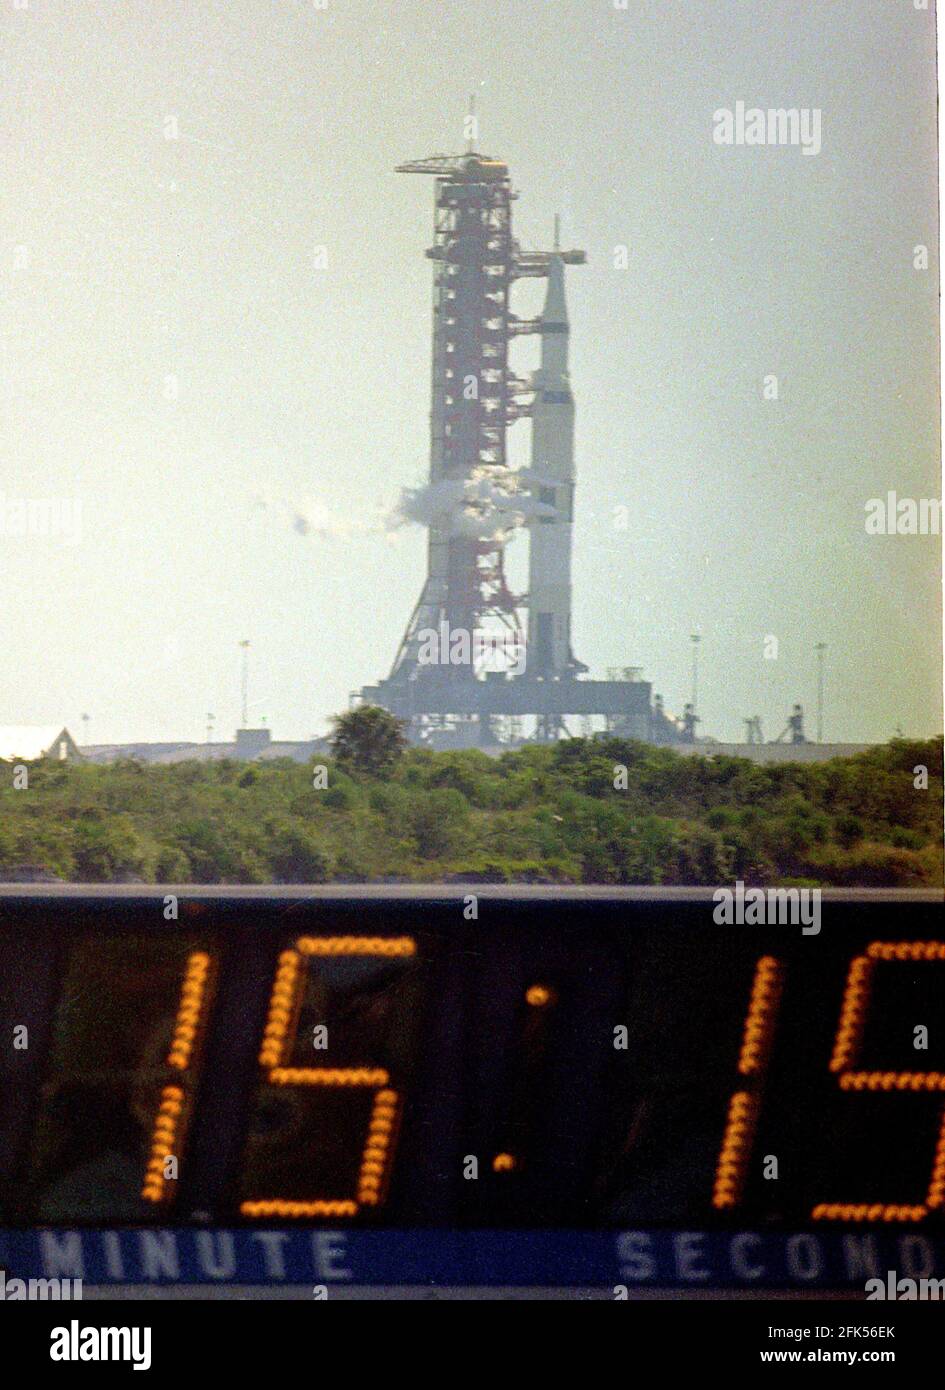 The Saturn V SA-506 launch vehicle with the Apollo 11 astronauts and equipment aboard, is pictured fifteen minutes and fifteen seconds prior to lift-off from Launch Complex 39A at the Kennedy Space Center at Cape Canaveral, Florida on Wednesday, July 16, 1969. It will launch the first manned mission to land on the Moon. Credit: Ron Sachs/CNP /MediaPunch Stock Photo